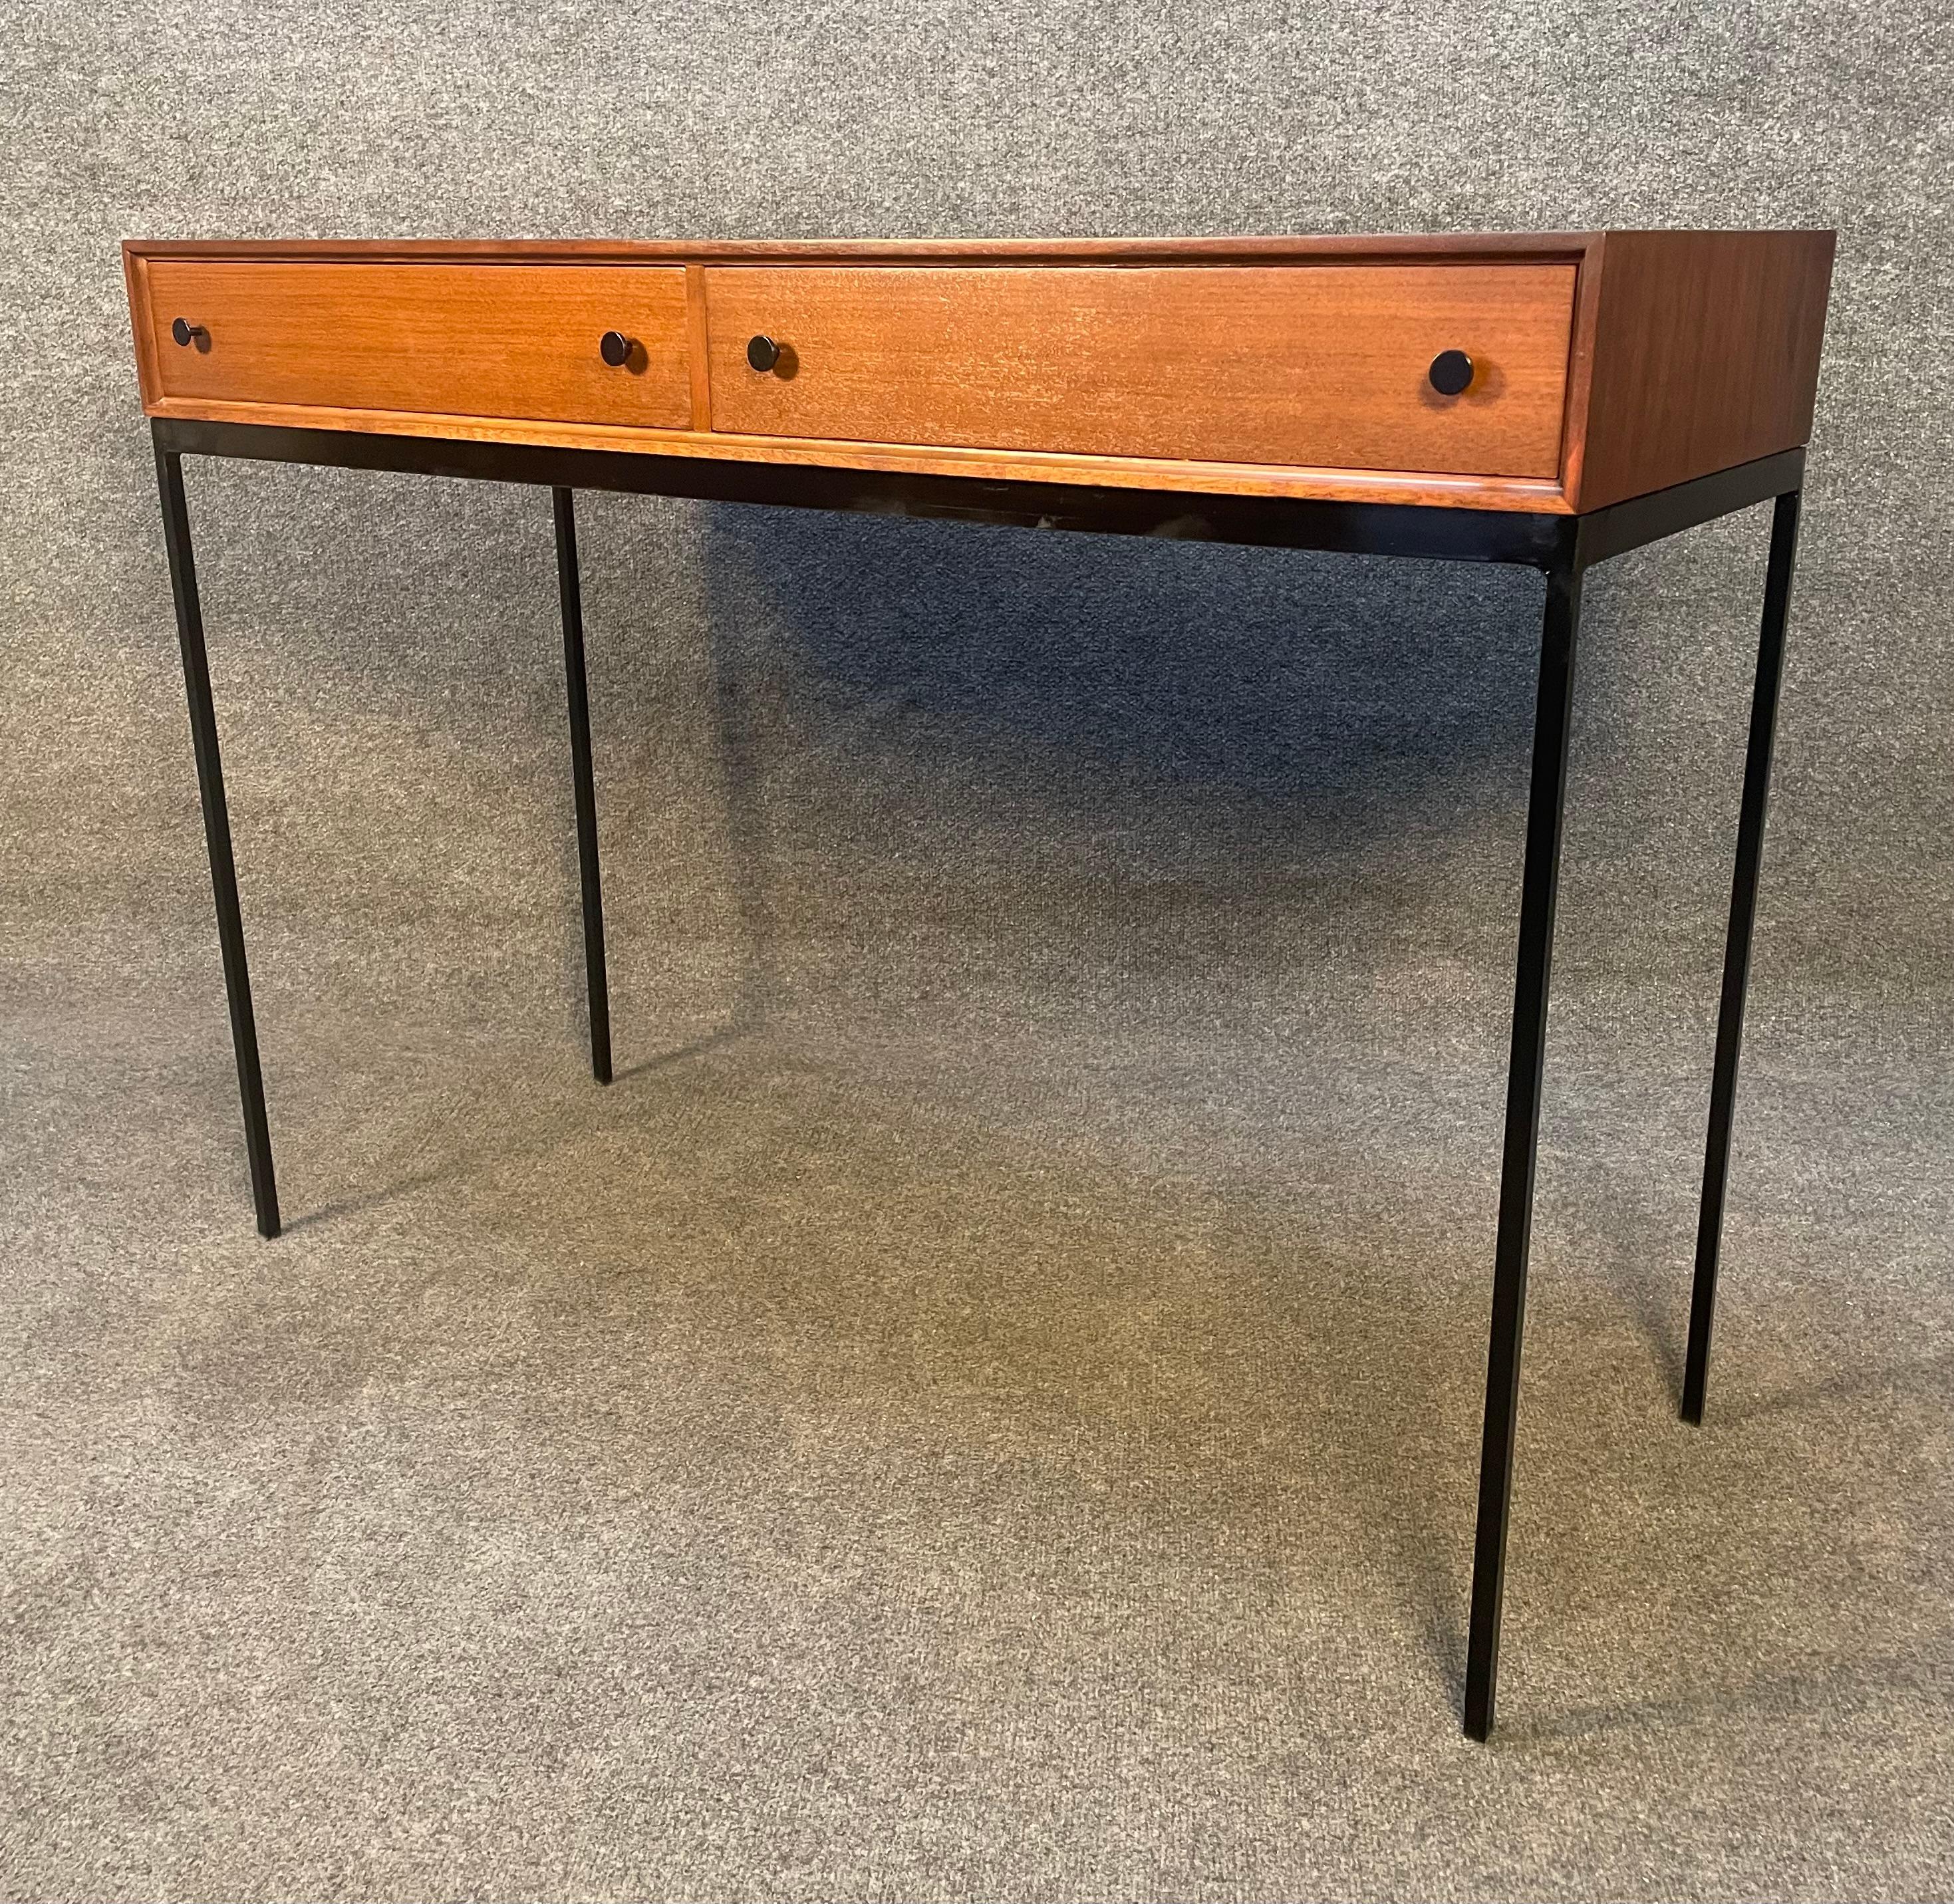 Mid-20th Century Vintage Danish Mid-Century Modern Walnut Entry Way Console by Poul Norreklit